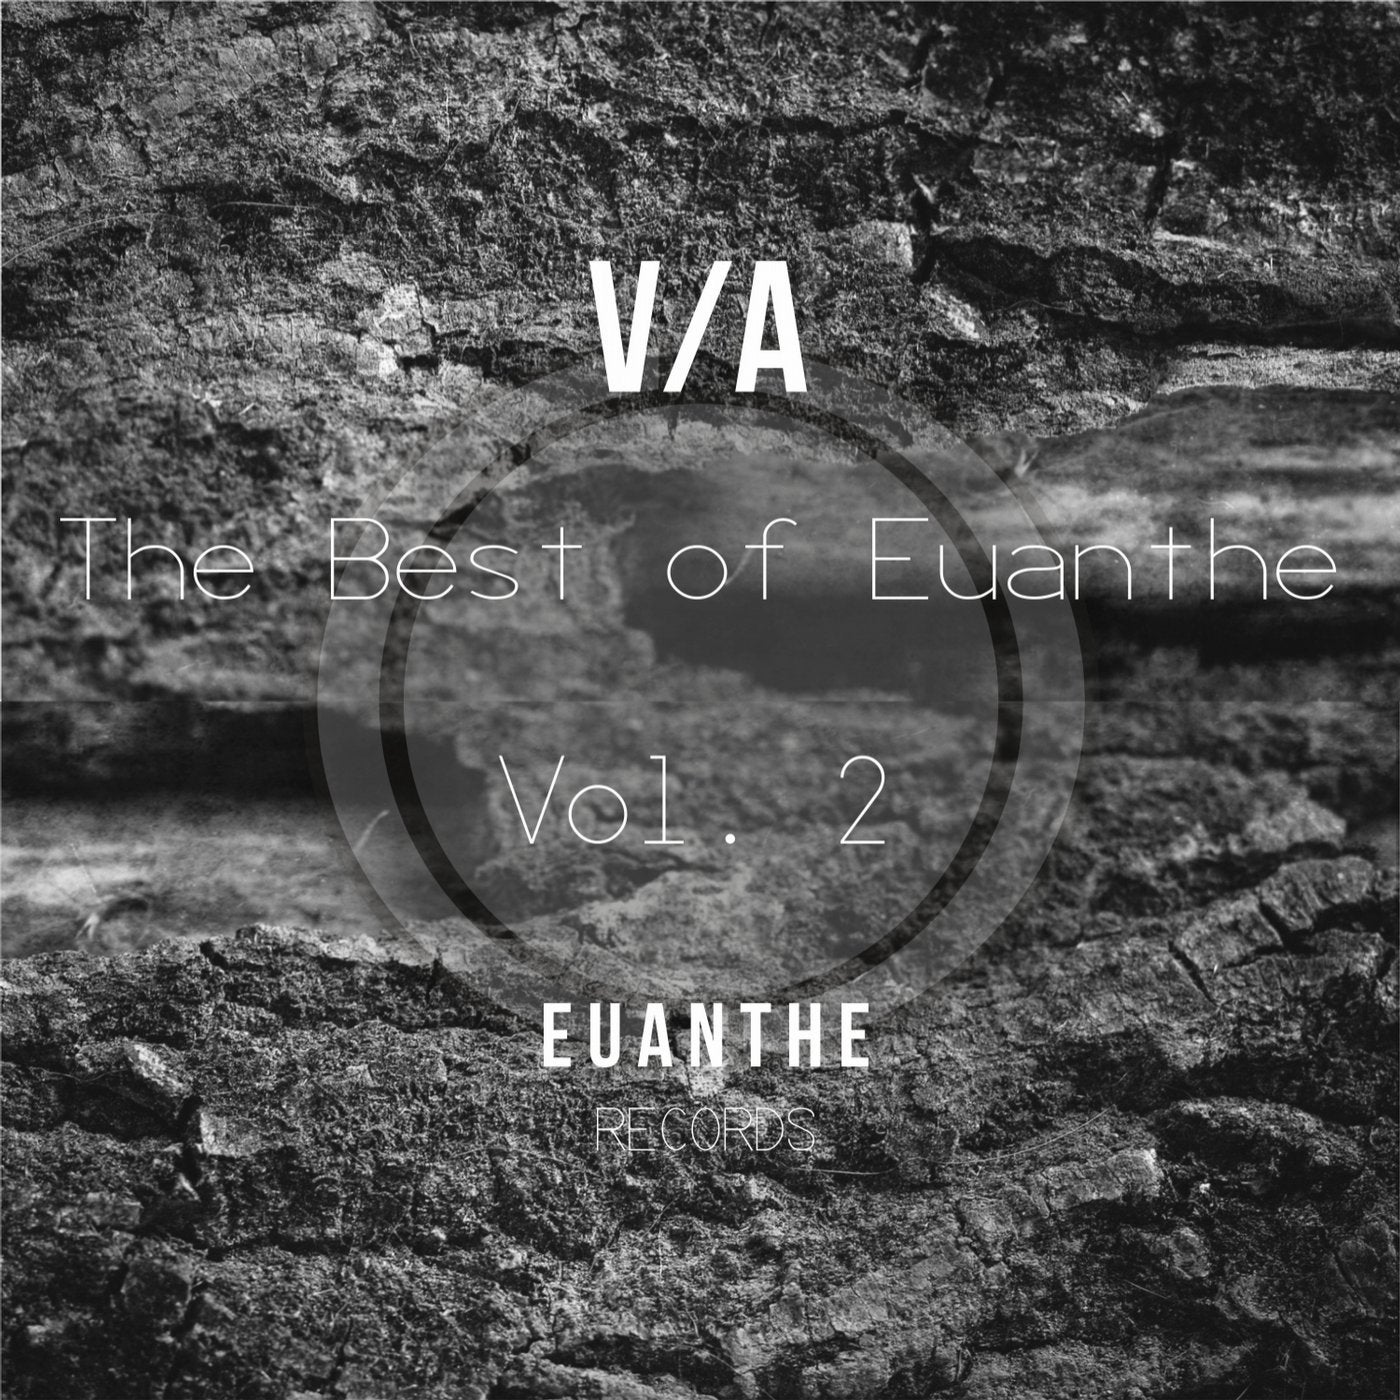 The Best of Euanthe Vol.2